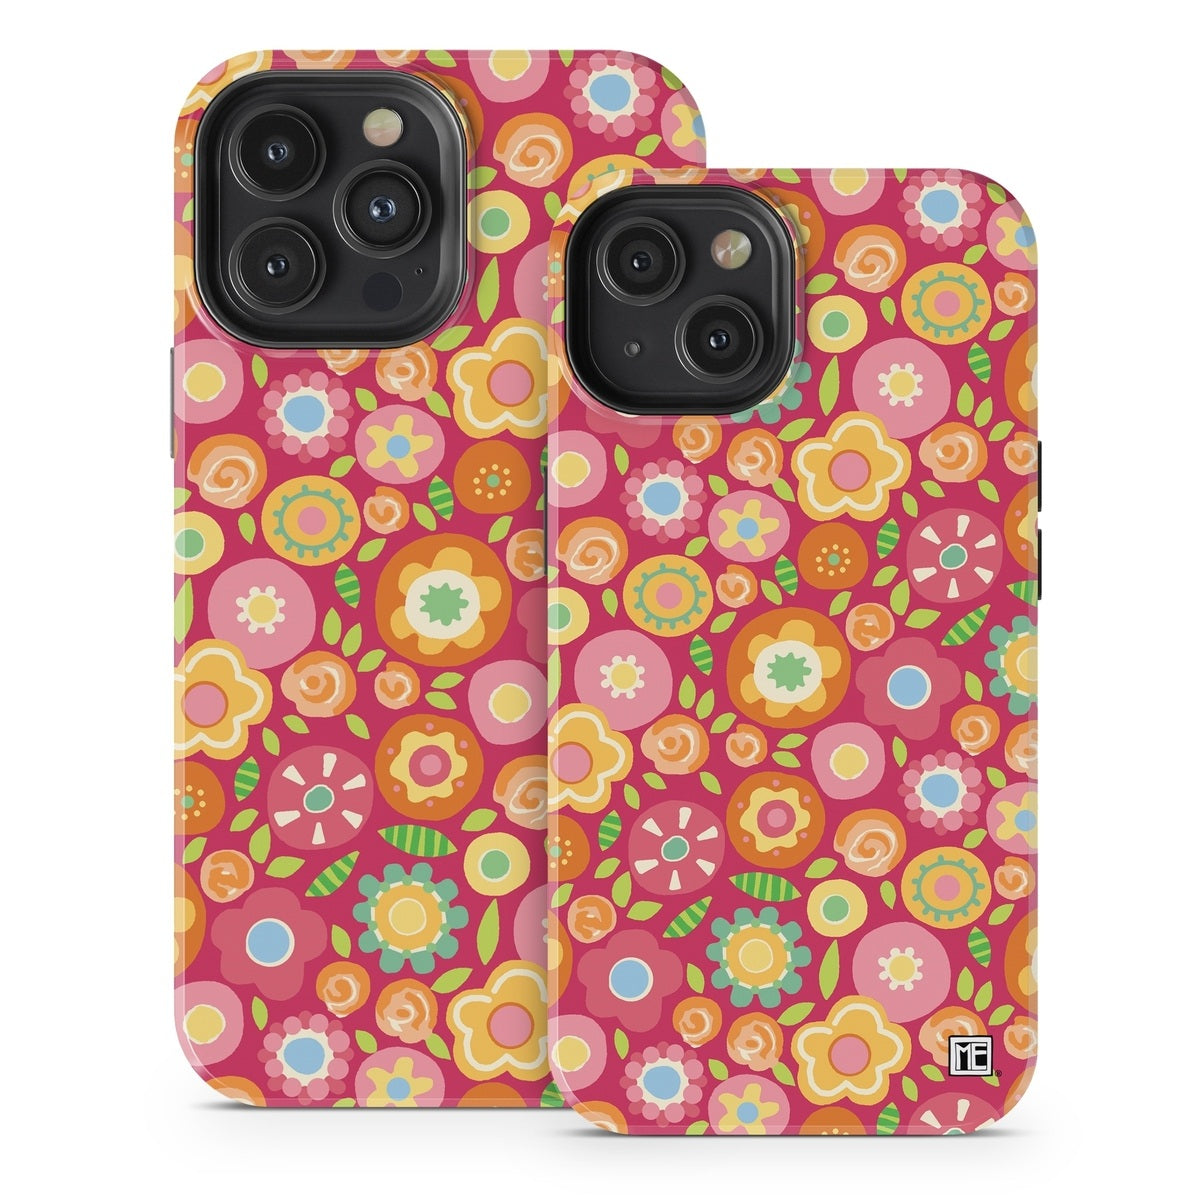 Squished Flowers Phone Cases